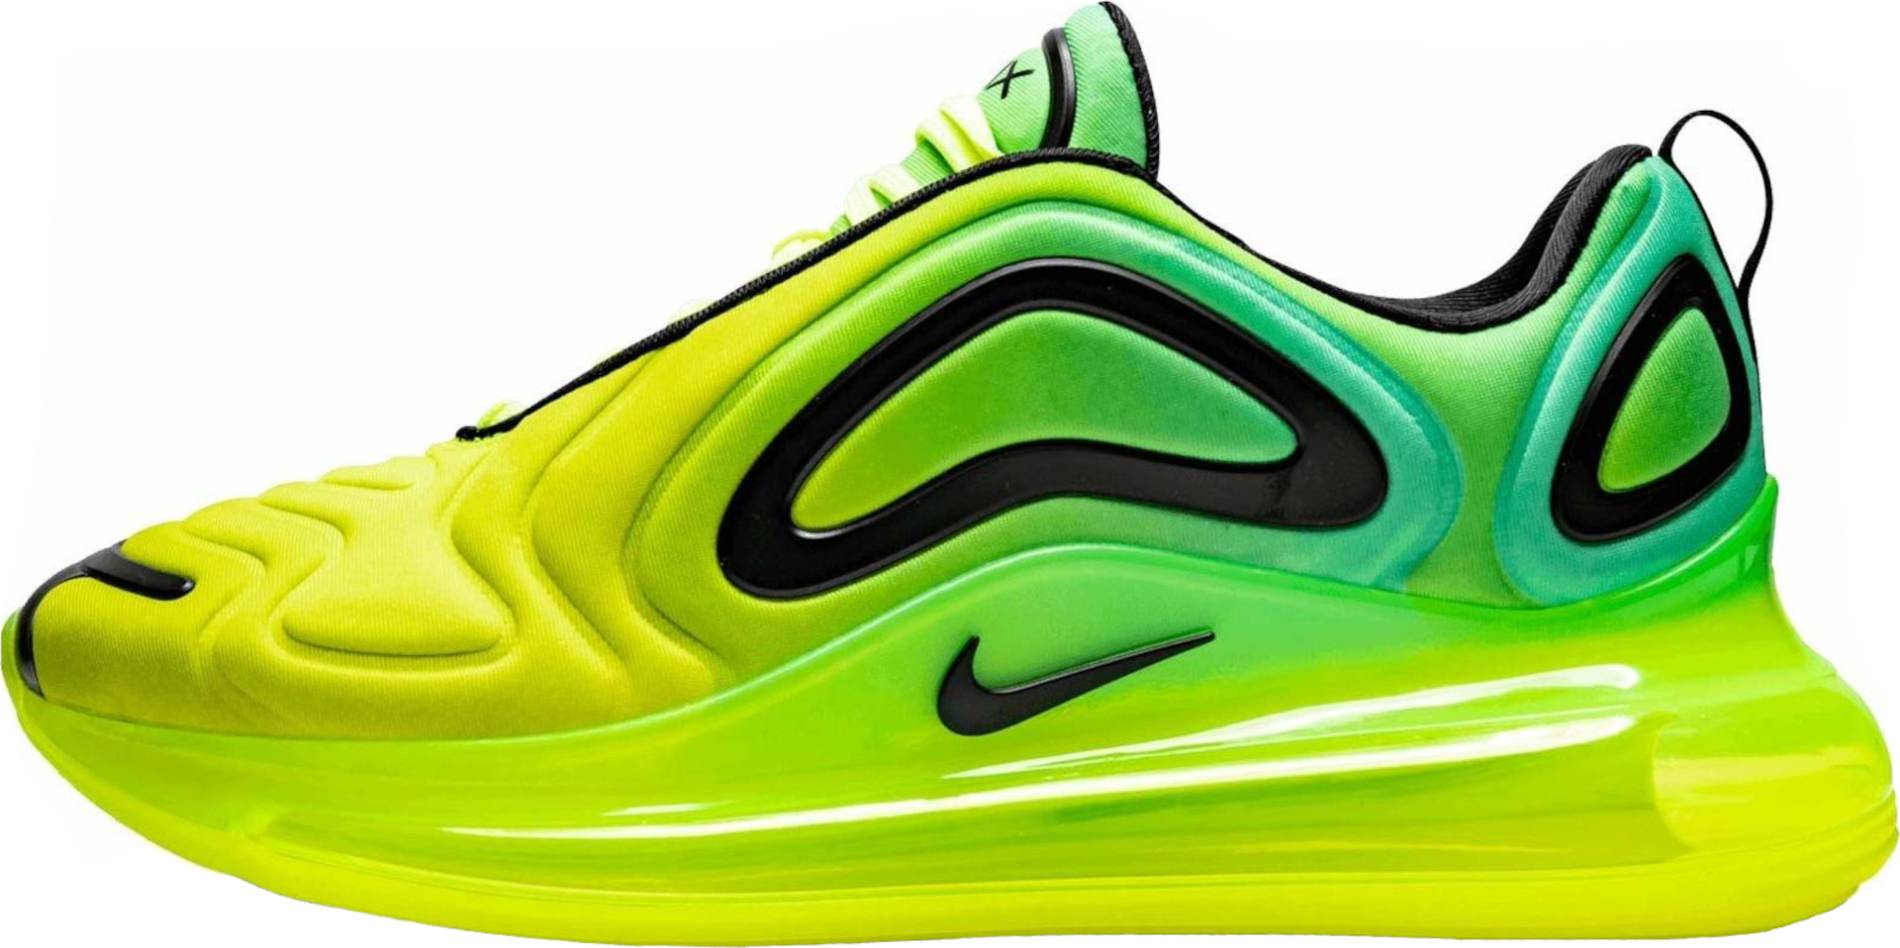 Save 33% on Green Nike Sneakers (75 